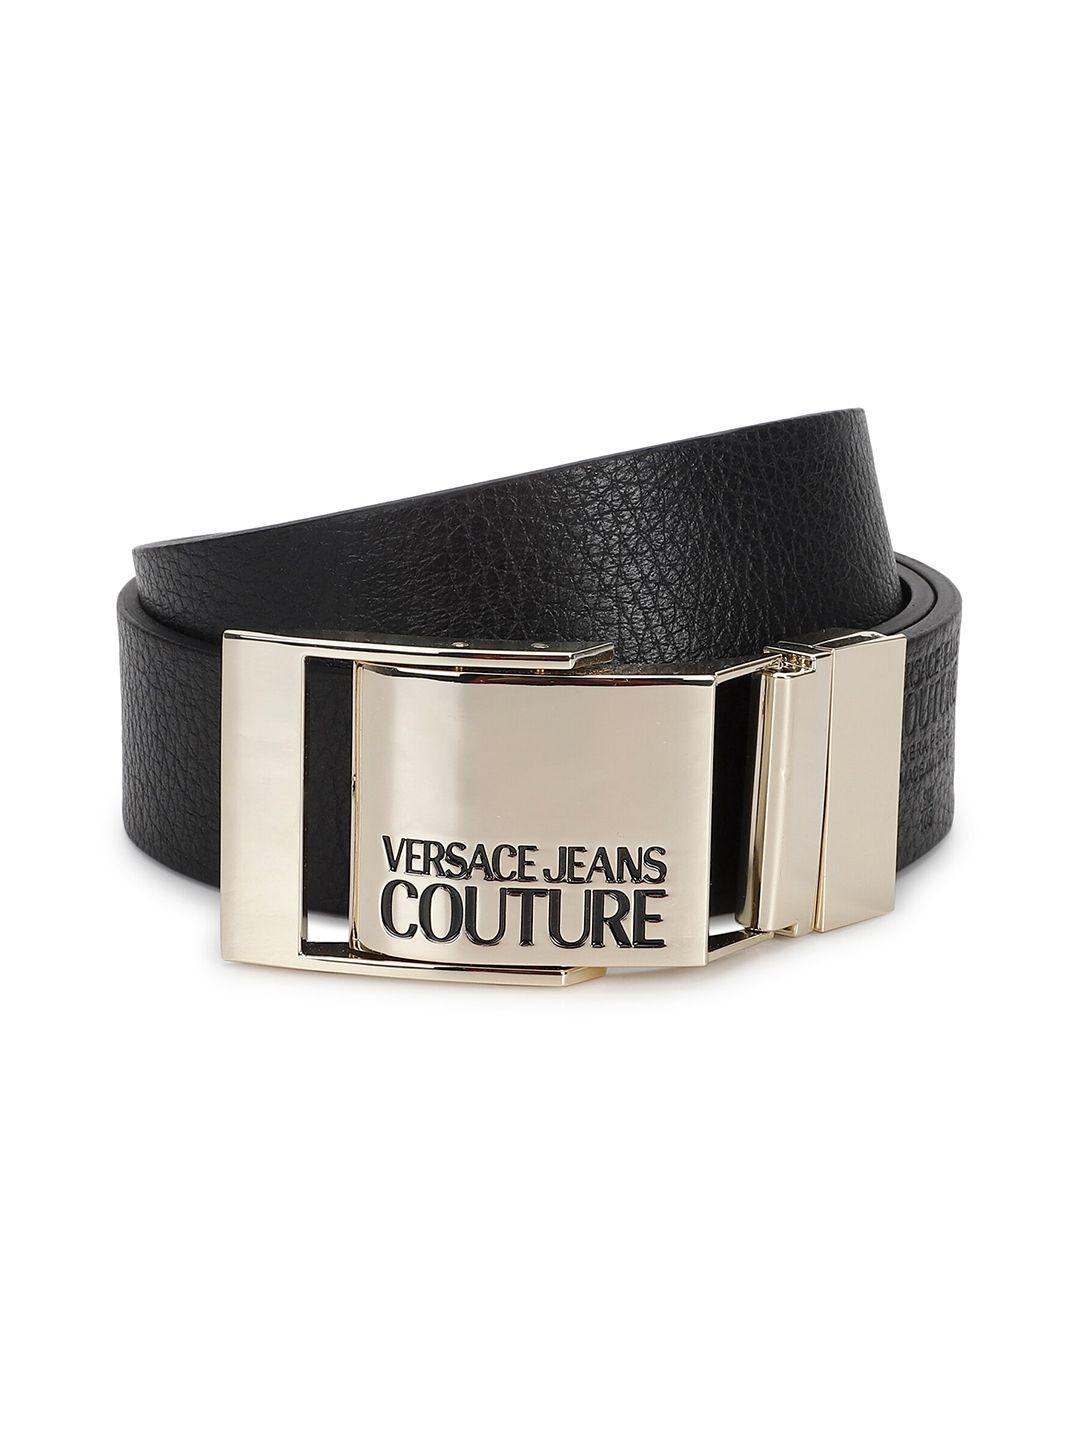 versace-jeans-couture-men-textured-leather-belt